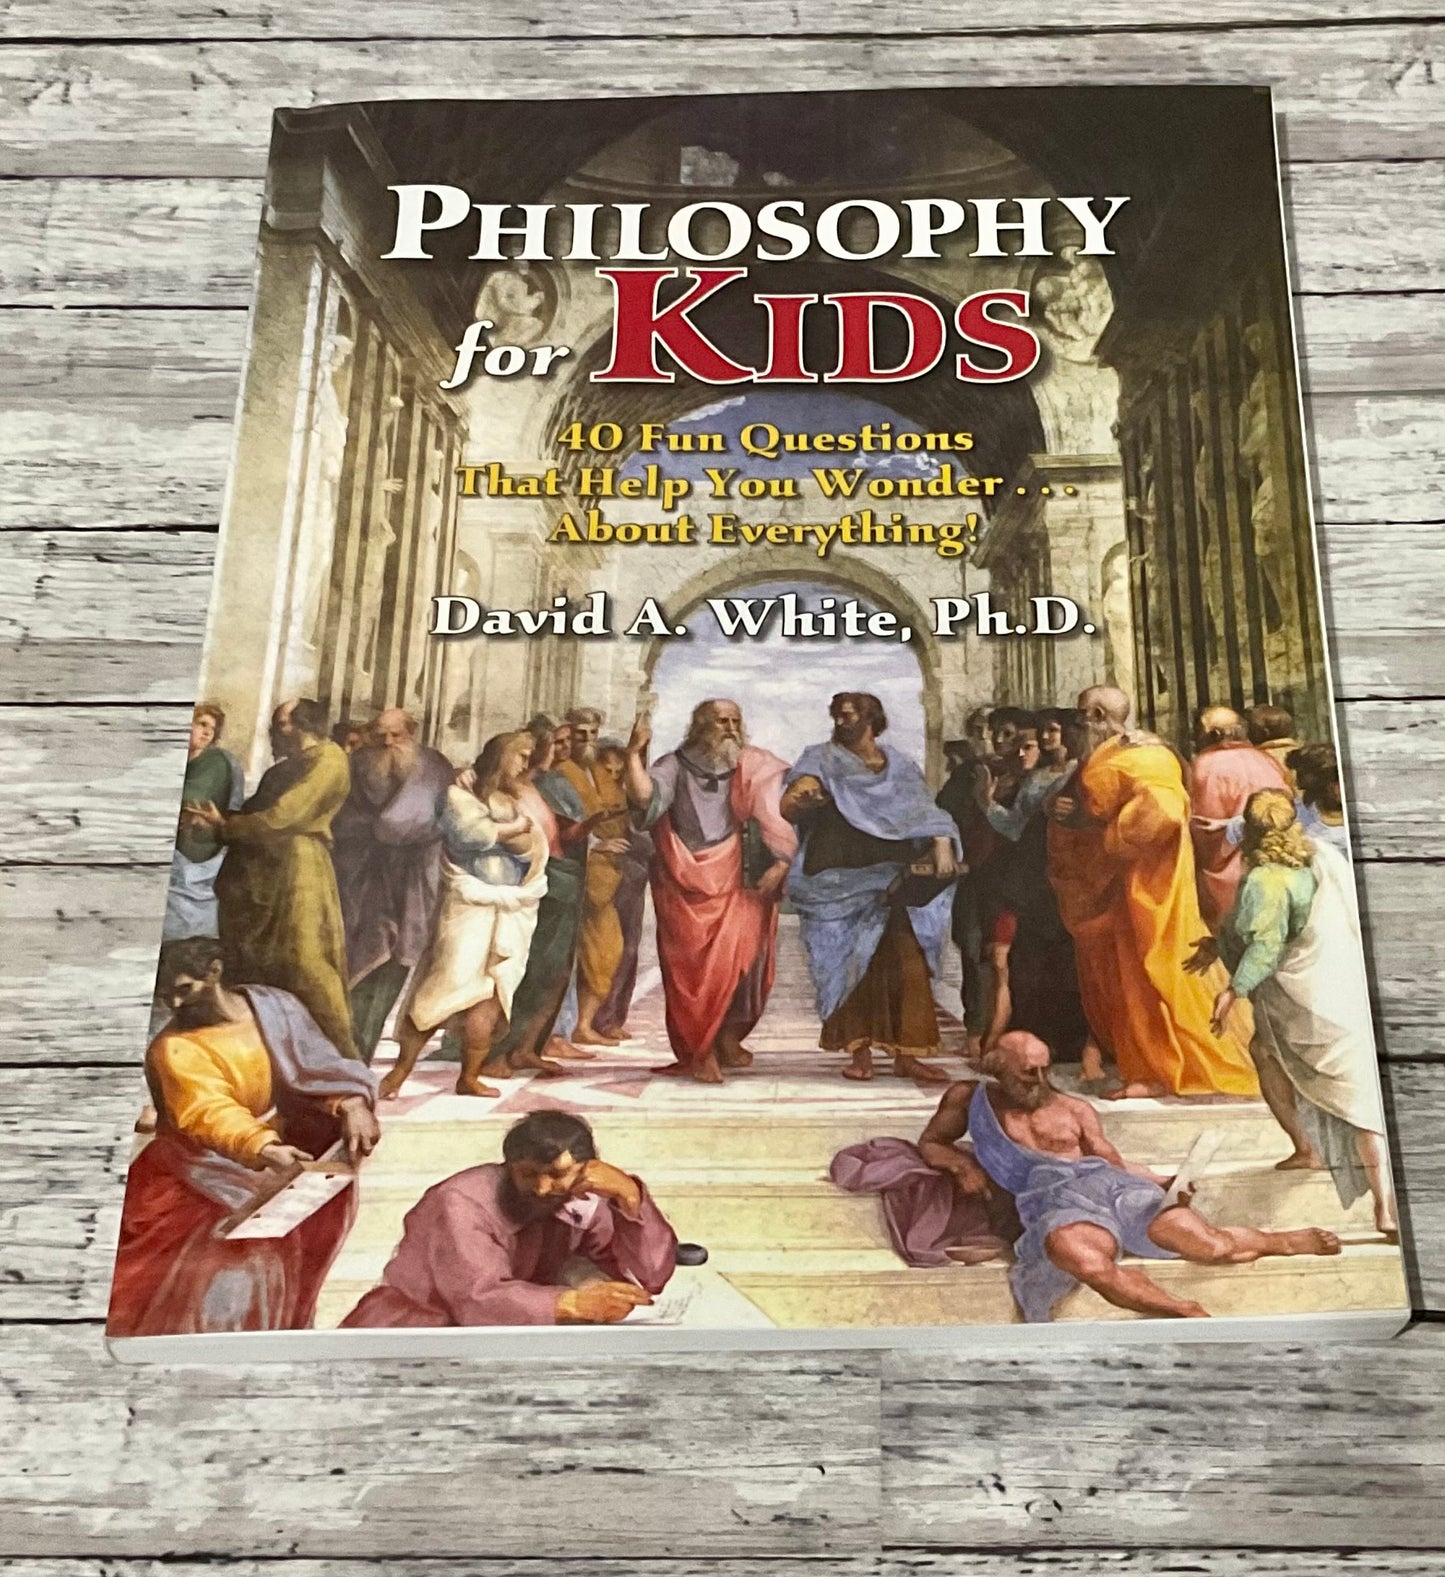 Philosophy for Kids: 40 Fun Questions That Help You Wonder About Everything! - Anchored Homeschool Resource Center